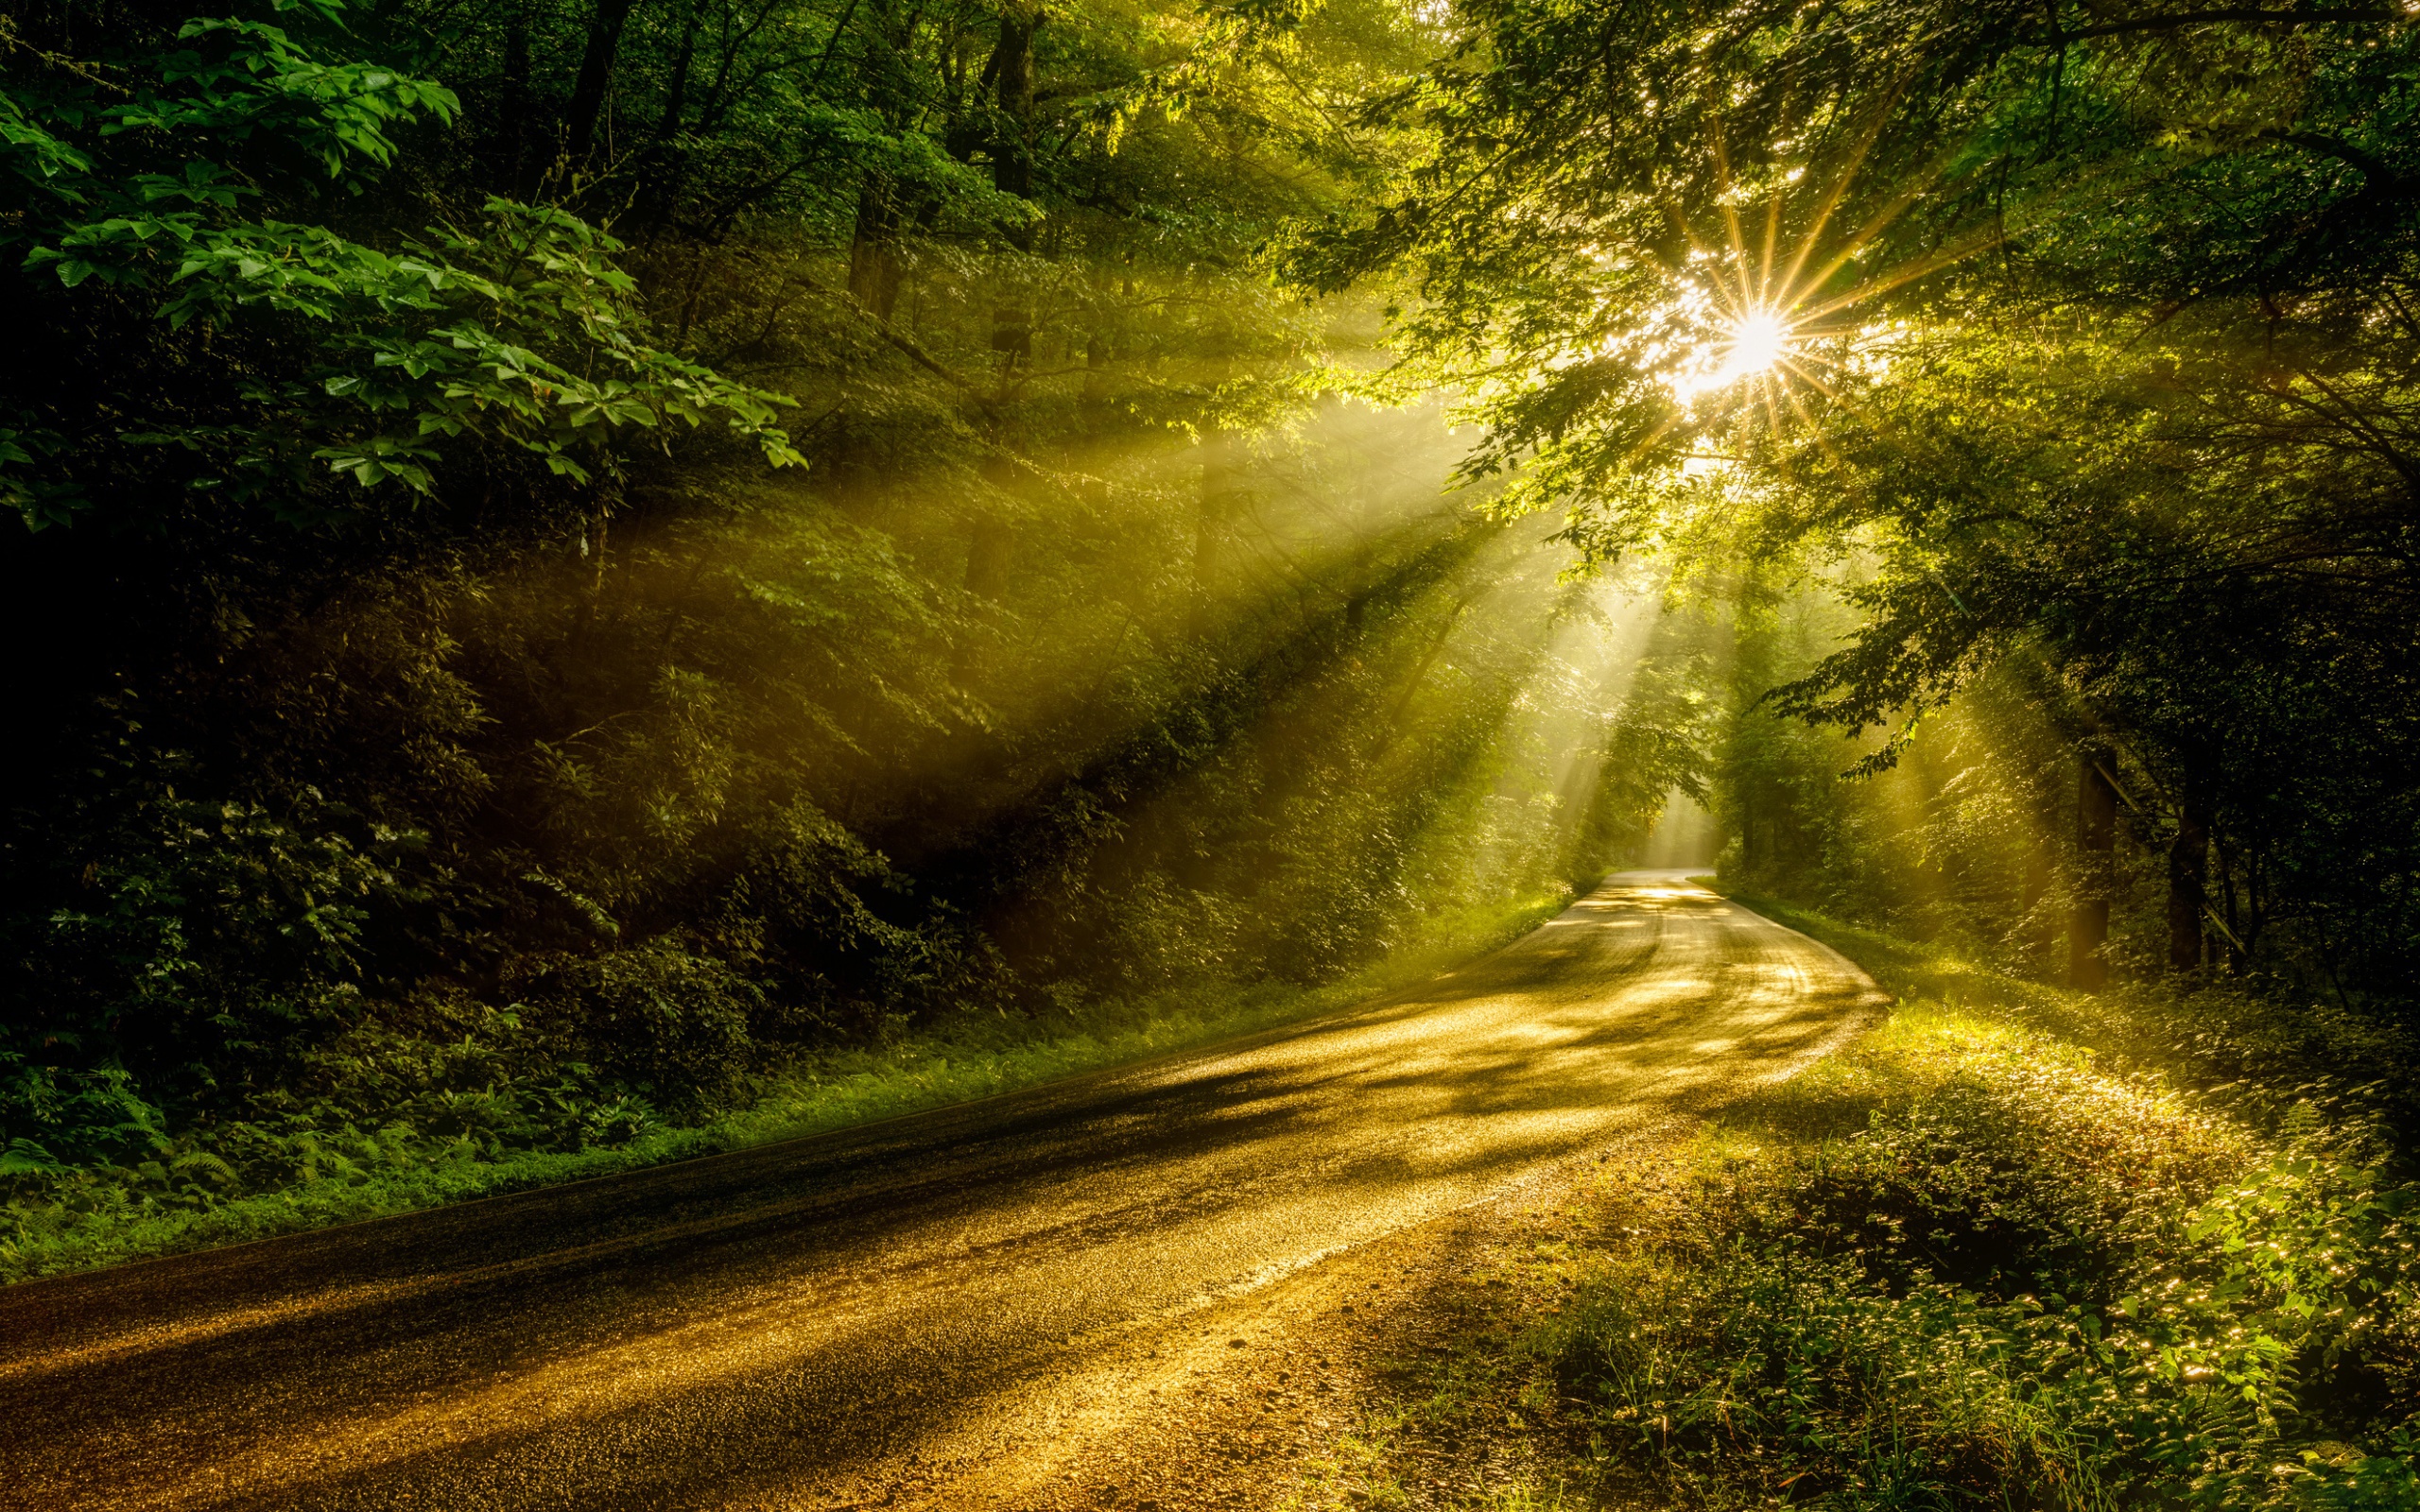 Sunlight Filtering Through The Trees Hd Wallpaper Background Image